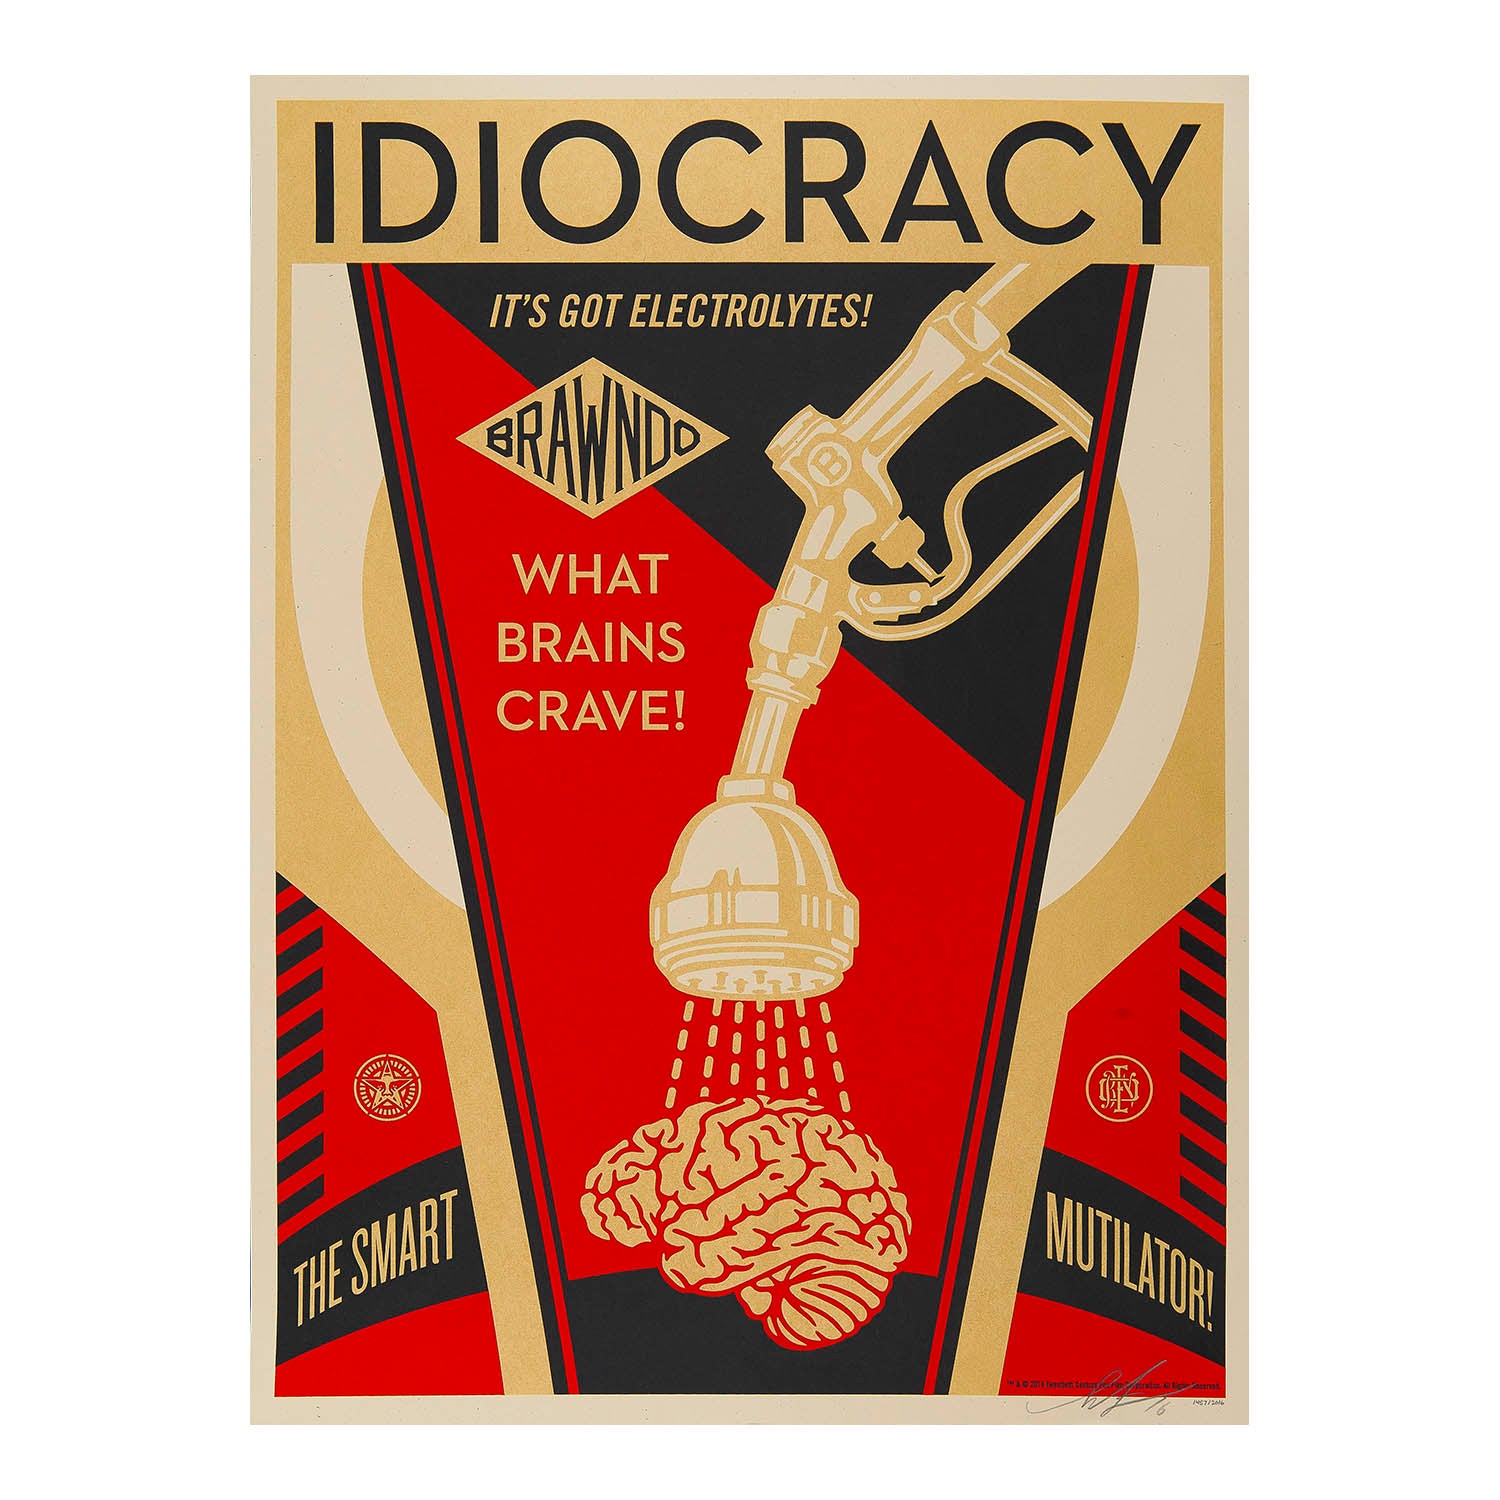 Original Shepherd Fairey screen print, Idiocracy, 2016. Signed, numbered, and dated in pencil lower right.